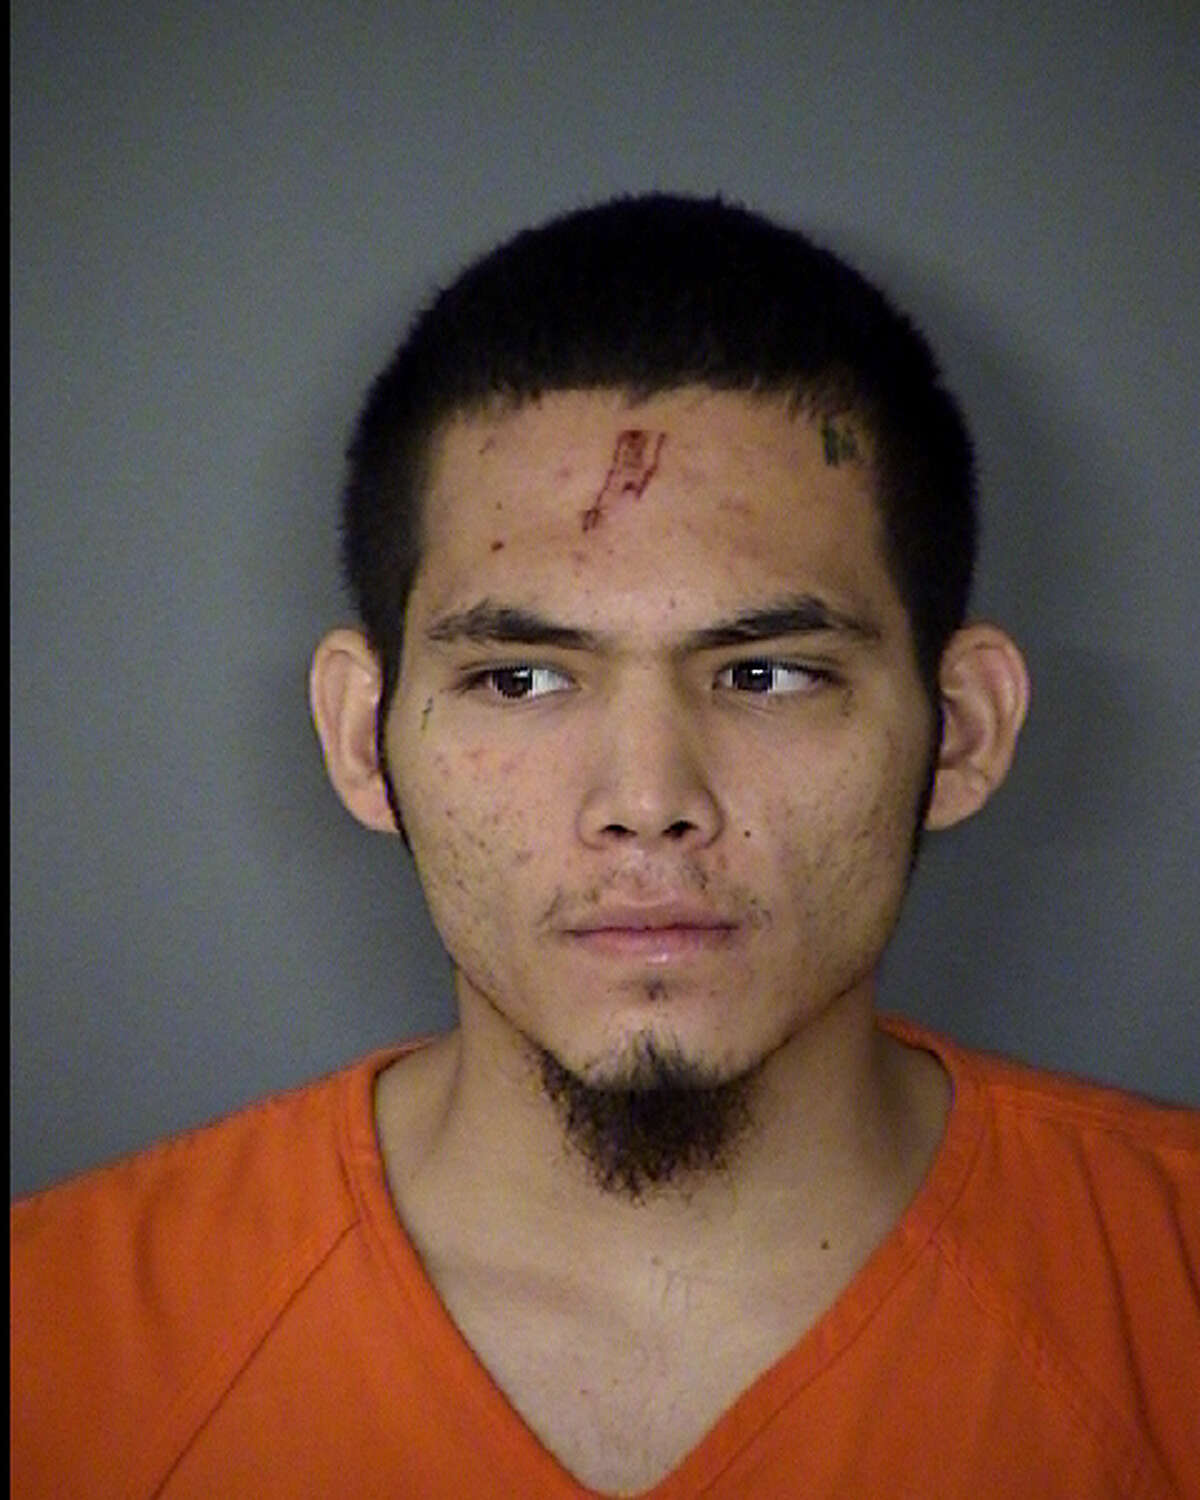 Daniel Jeremy Torres Jr., 19, faces a charge of murder, according to Bexar County Jail records/